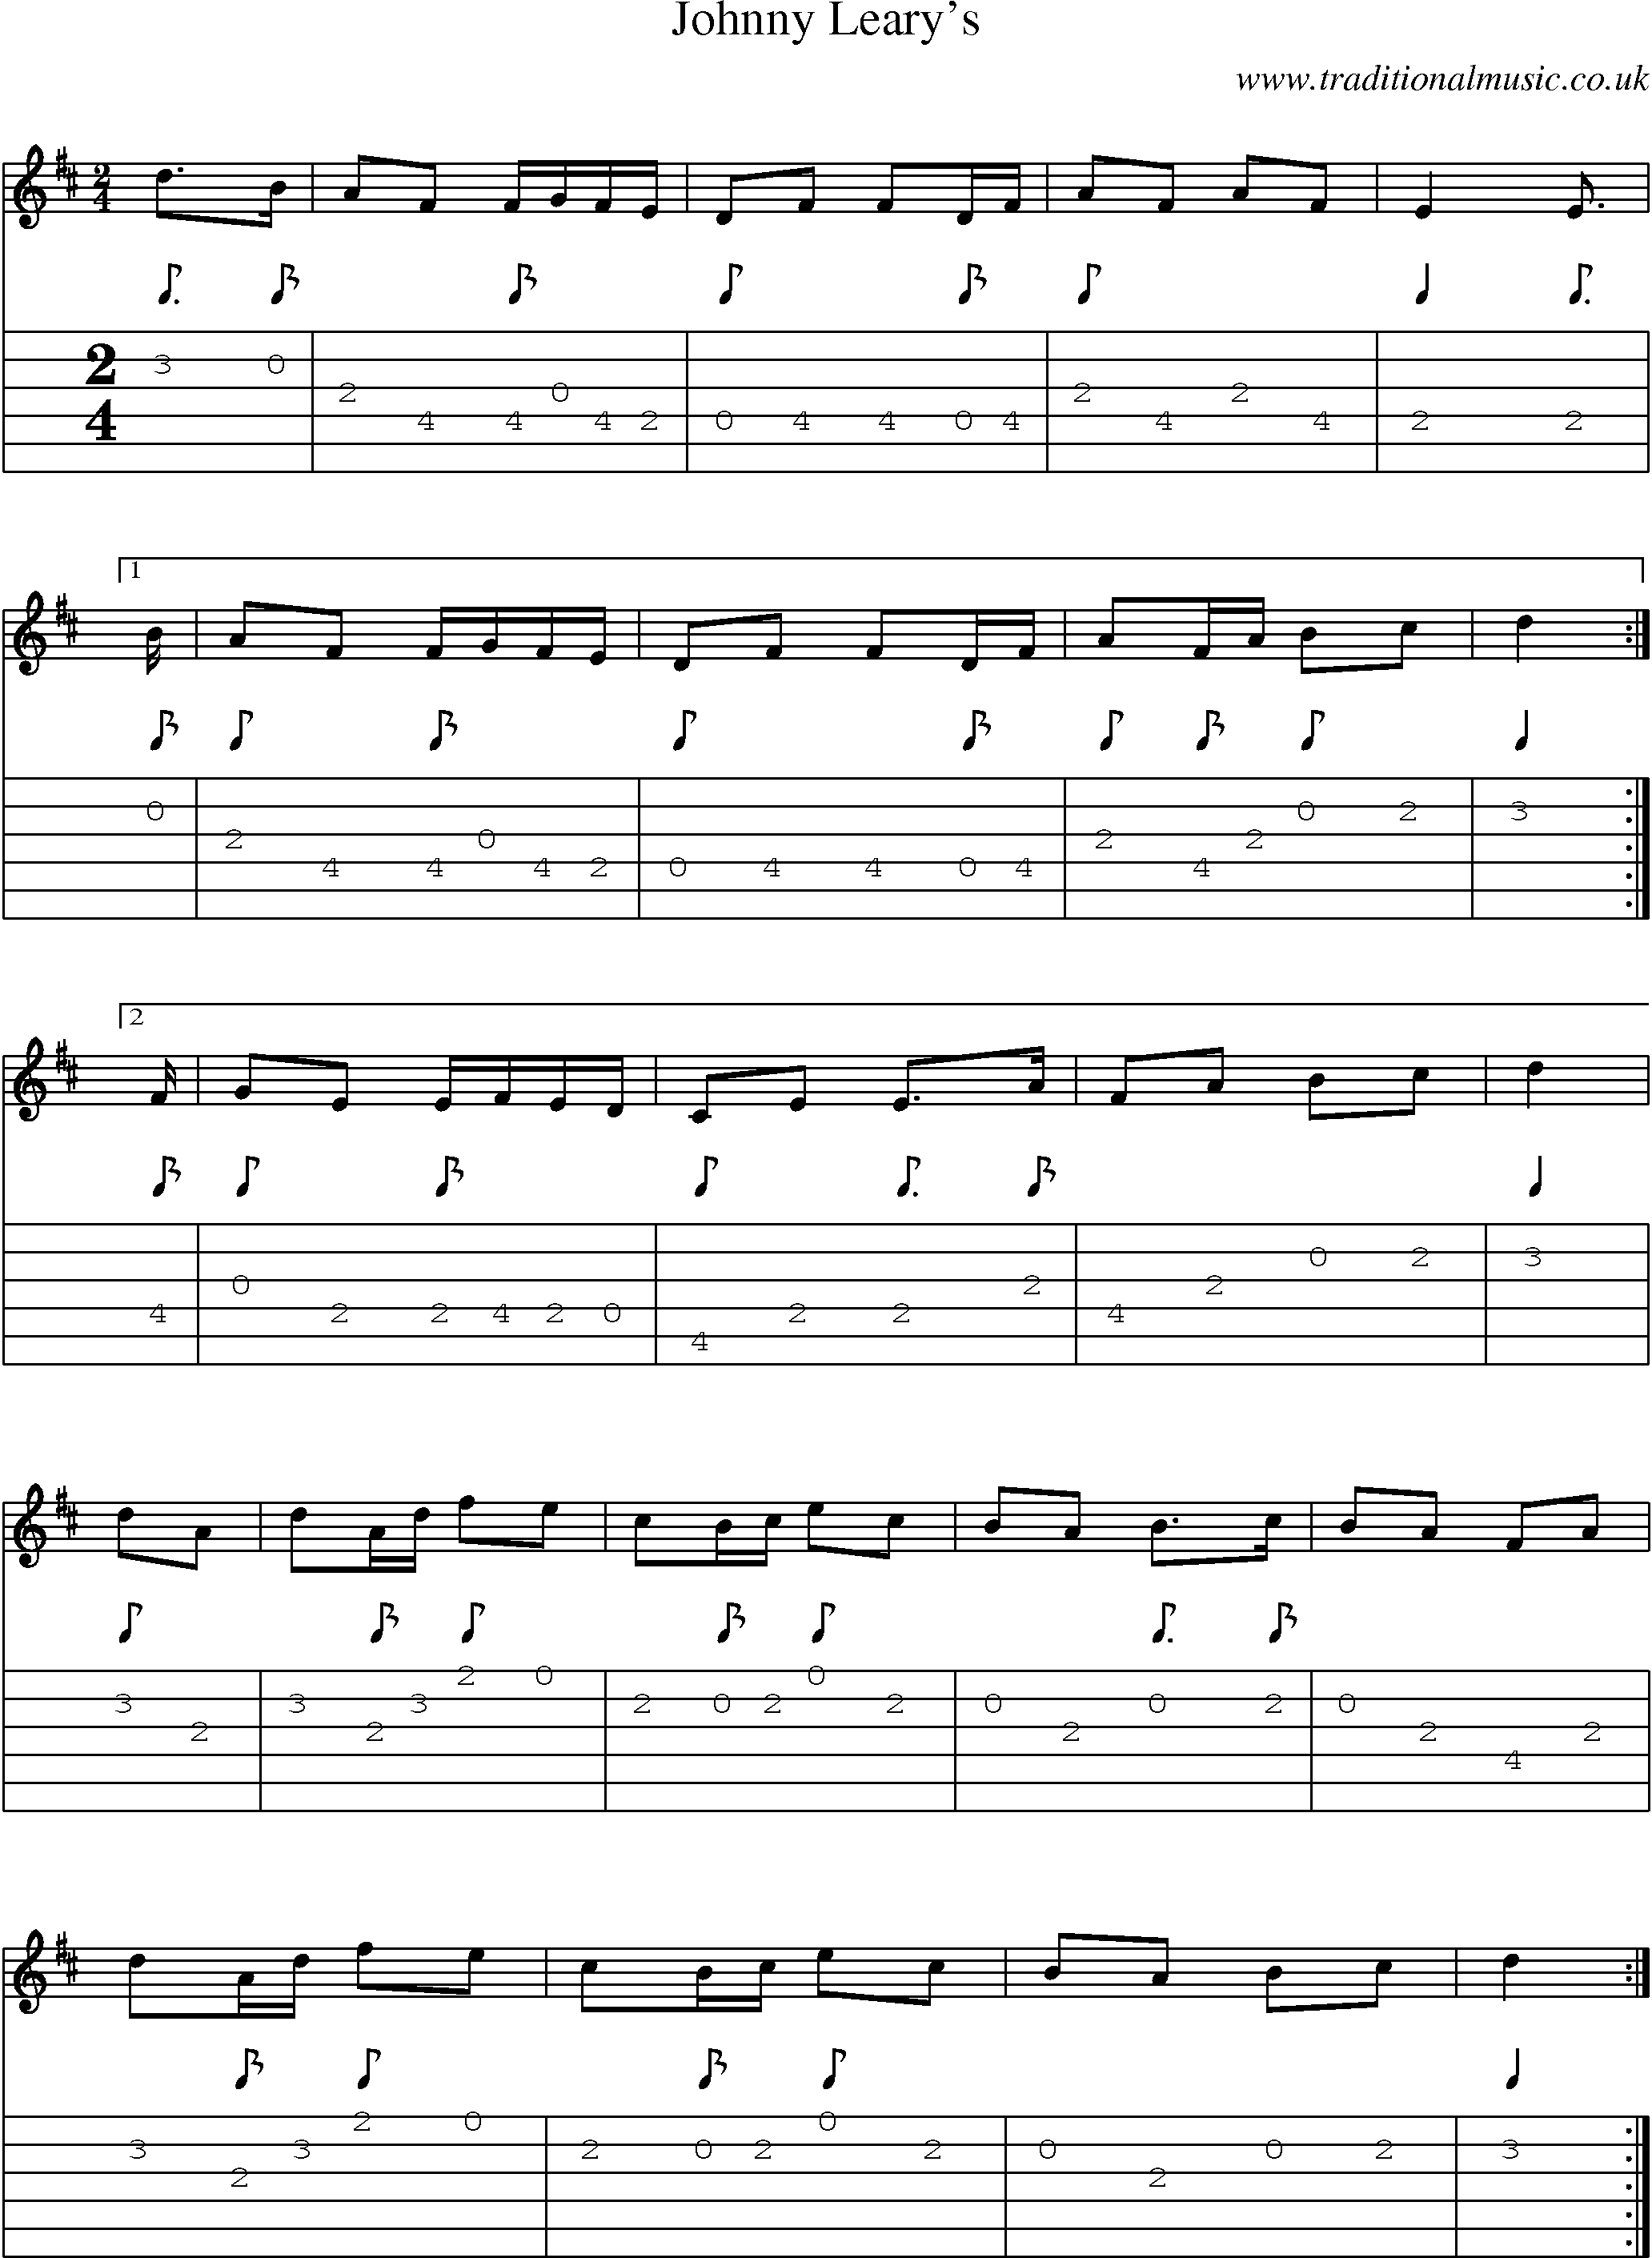 Music Score and Guitar Tabs for Johnny Learys